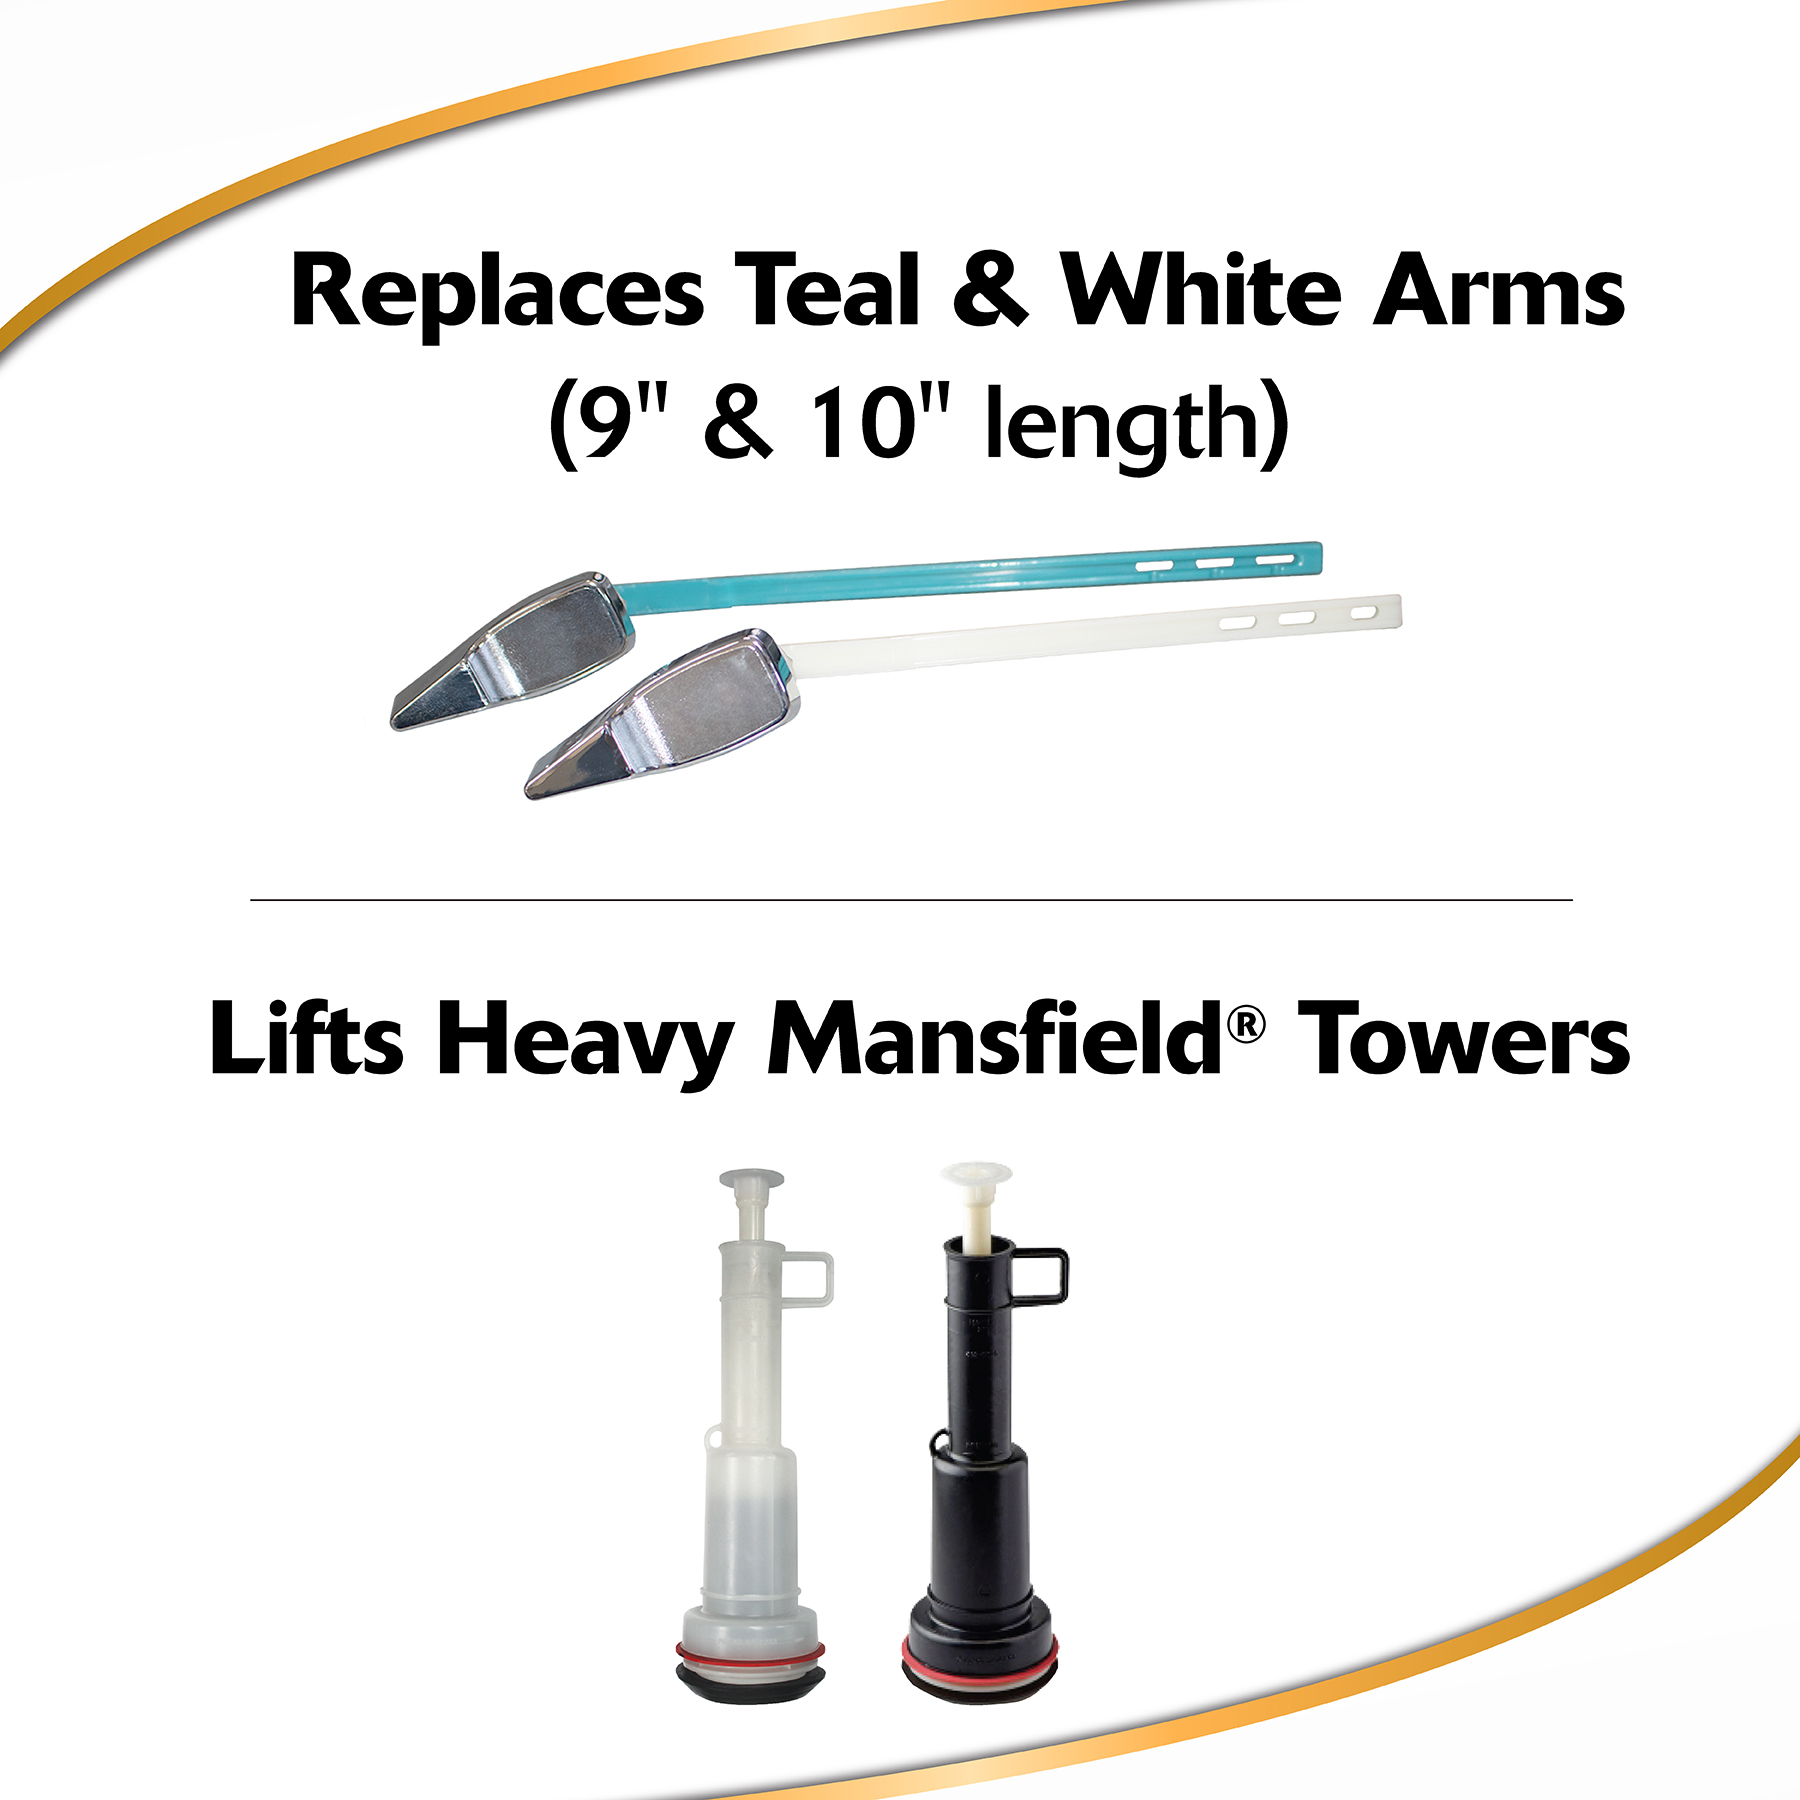 mansfield toilet handle replaces teal and white arms and lifts heavy mansfield towers